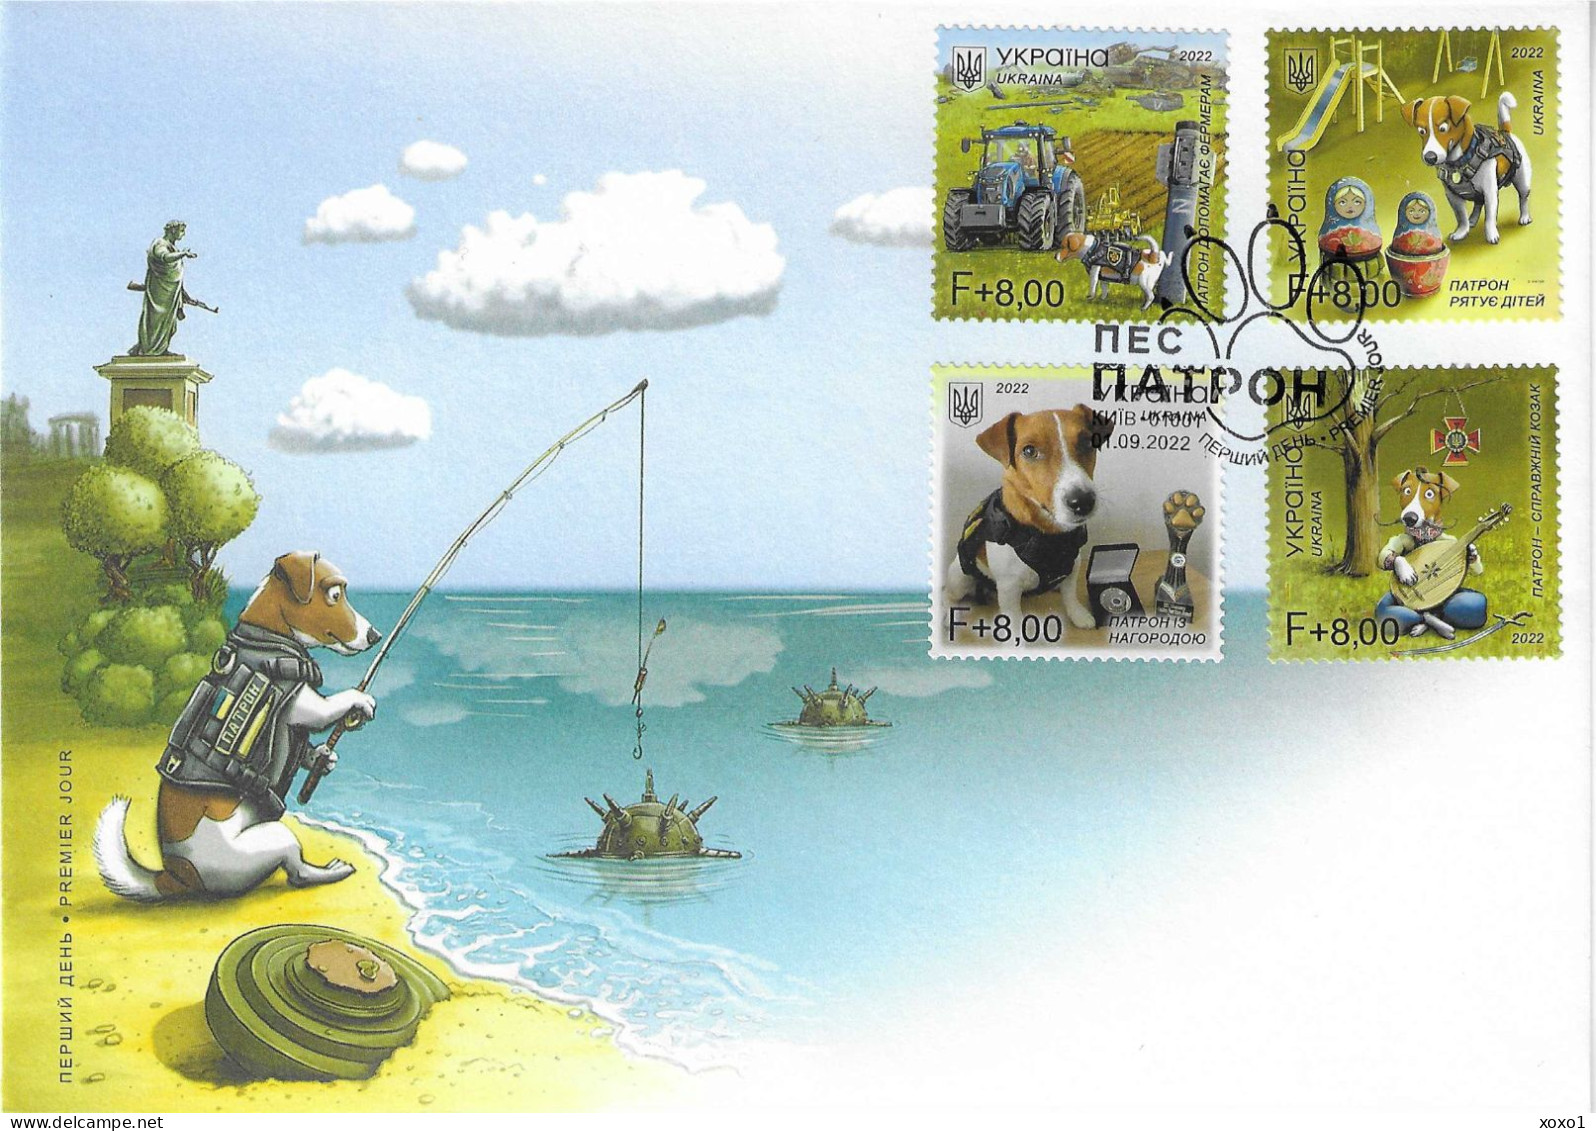 Ukraine 2022 MiNr. 2047 - 2050 WW3, Detection Dog “Patron”, Jack Russell Terrier, Militaria  FDC  MNH ** 9.25 € - Perros